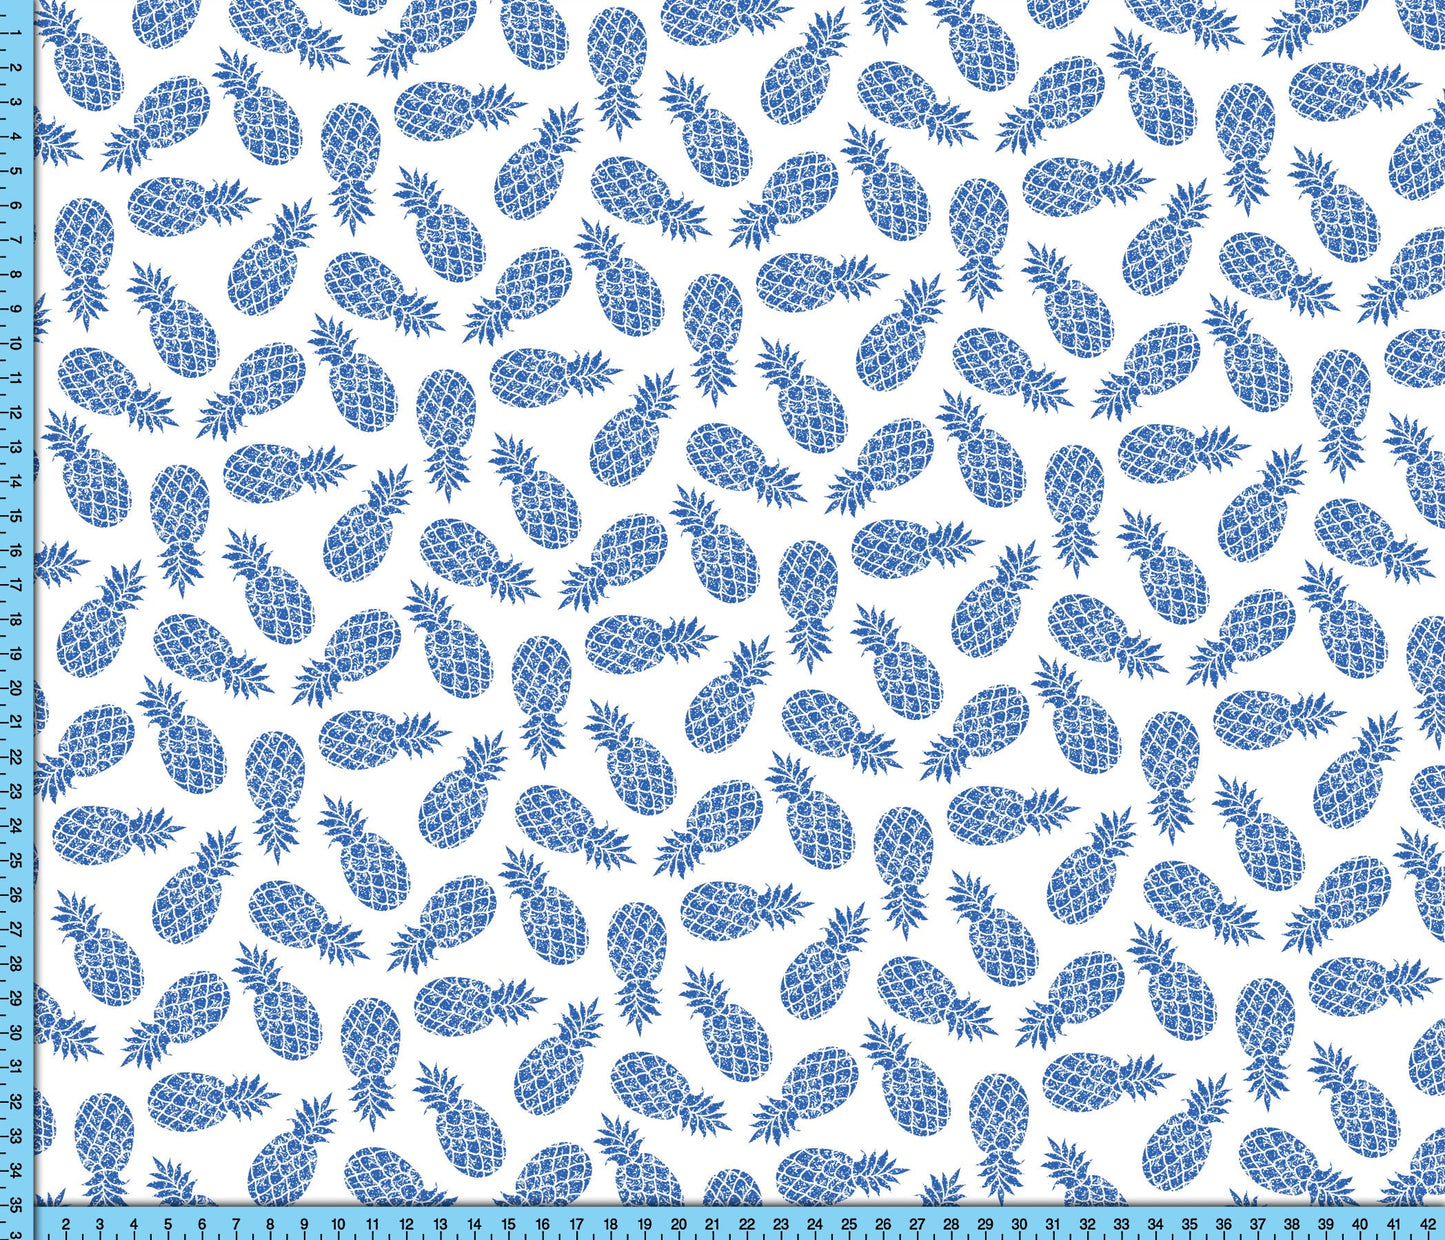 Vintage Style Tropical Pattern Printed on choice of Fabric By the Yard. Tropical Blue Pineapple Print Fabric